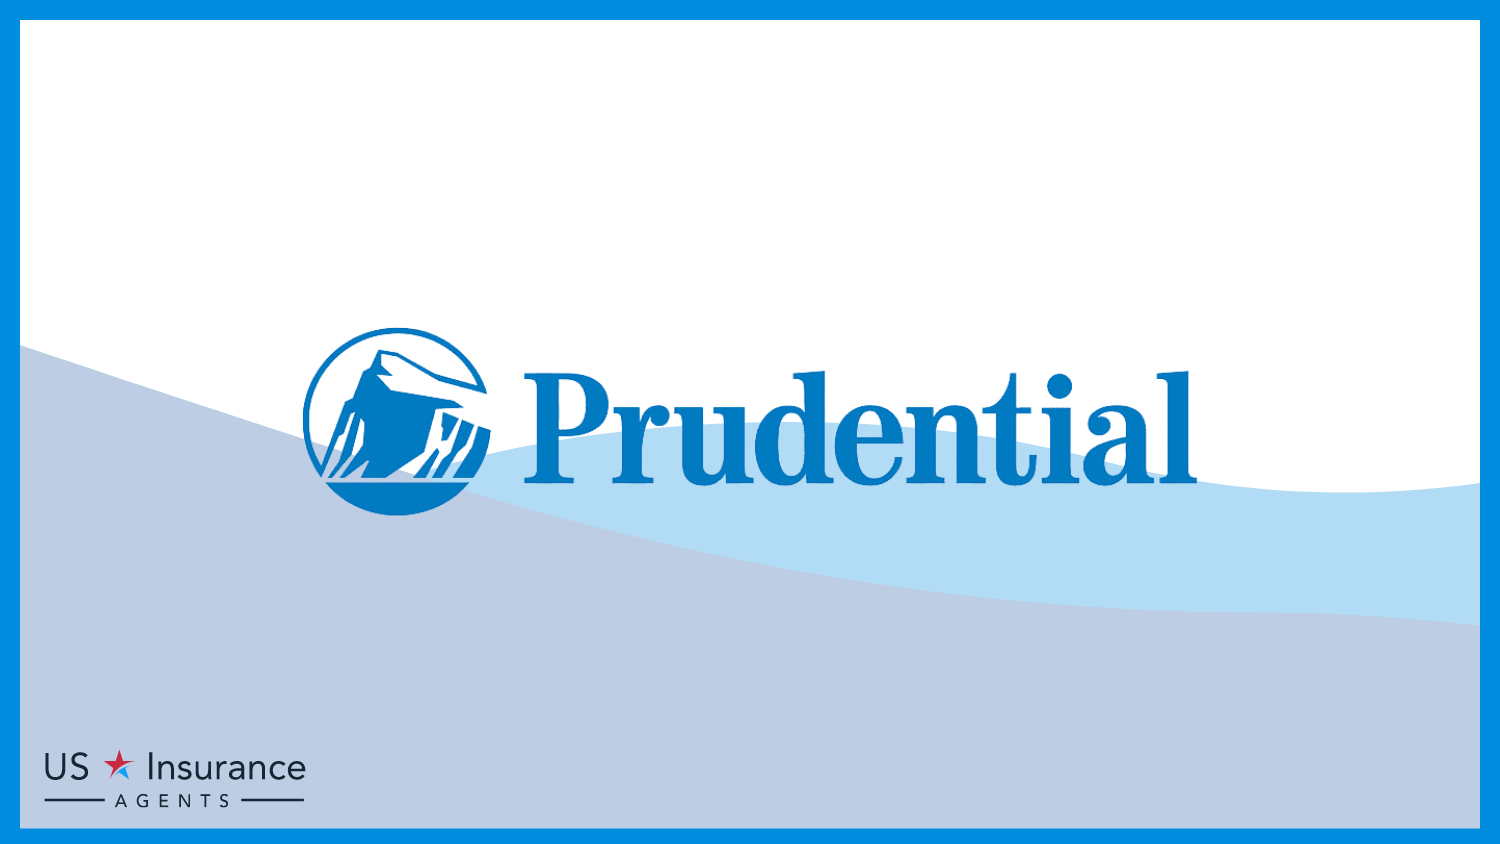 Prudential: Best Life Insurance for People With Down Syndrome